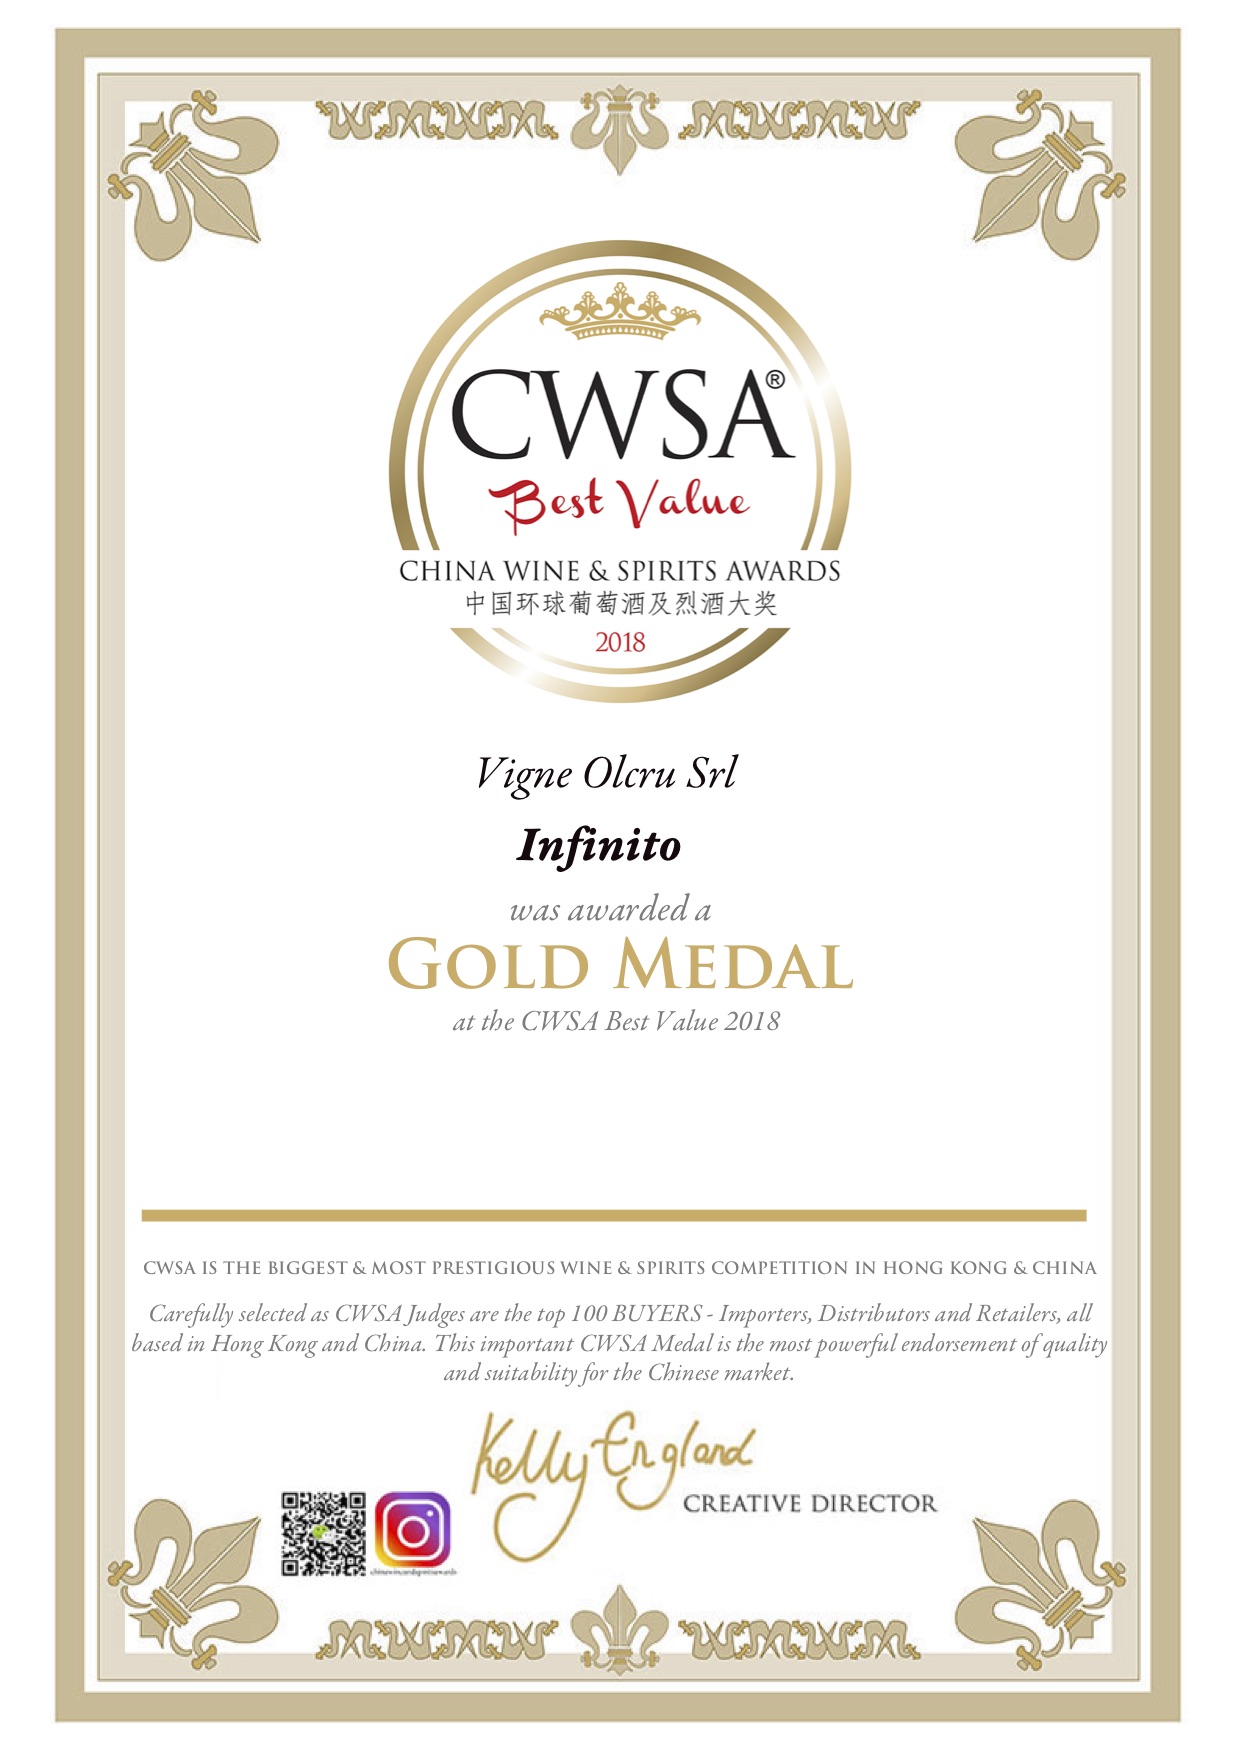 CWSA Best Value 2018 – INFINITO